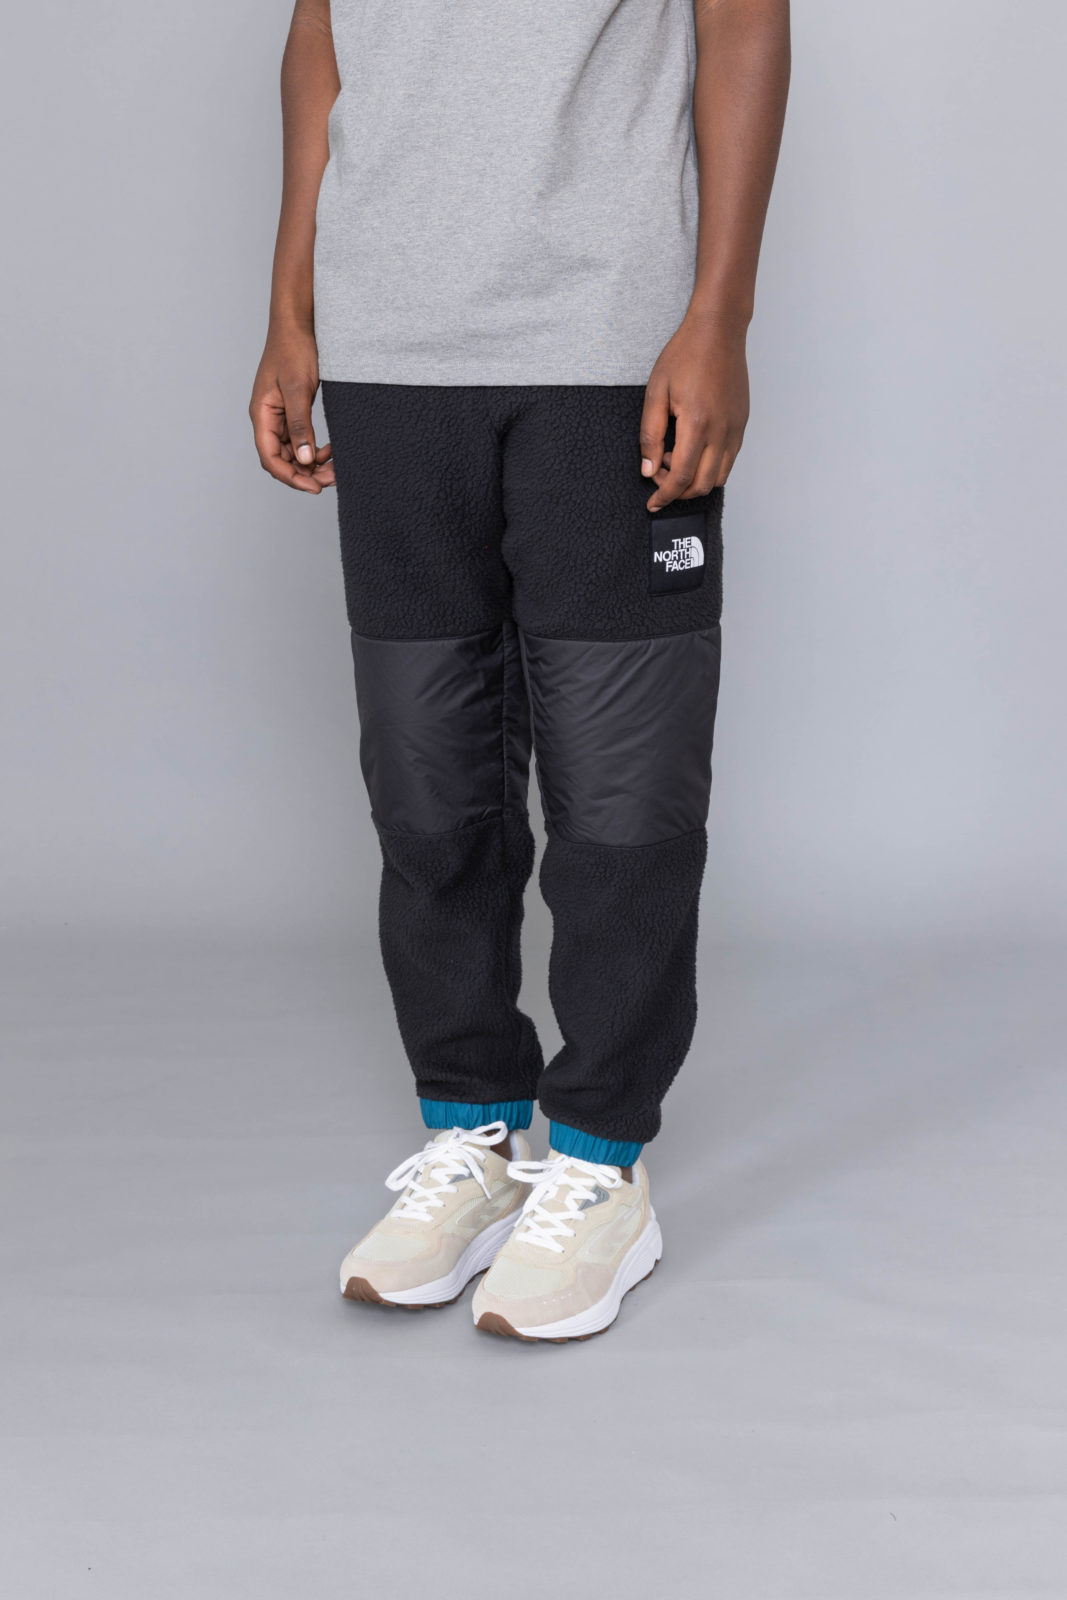 north face denali trousers